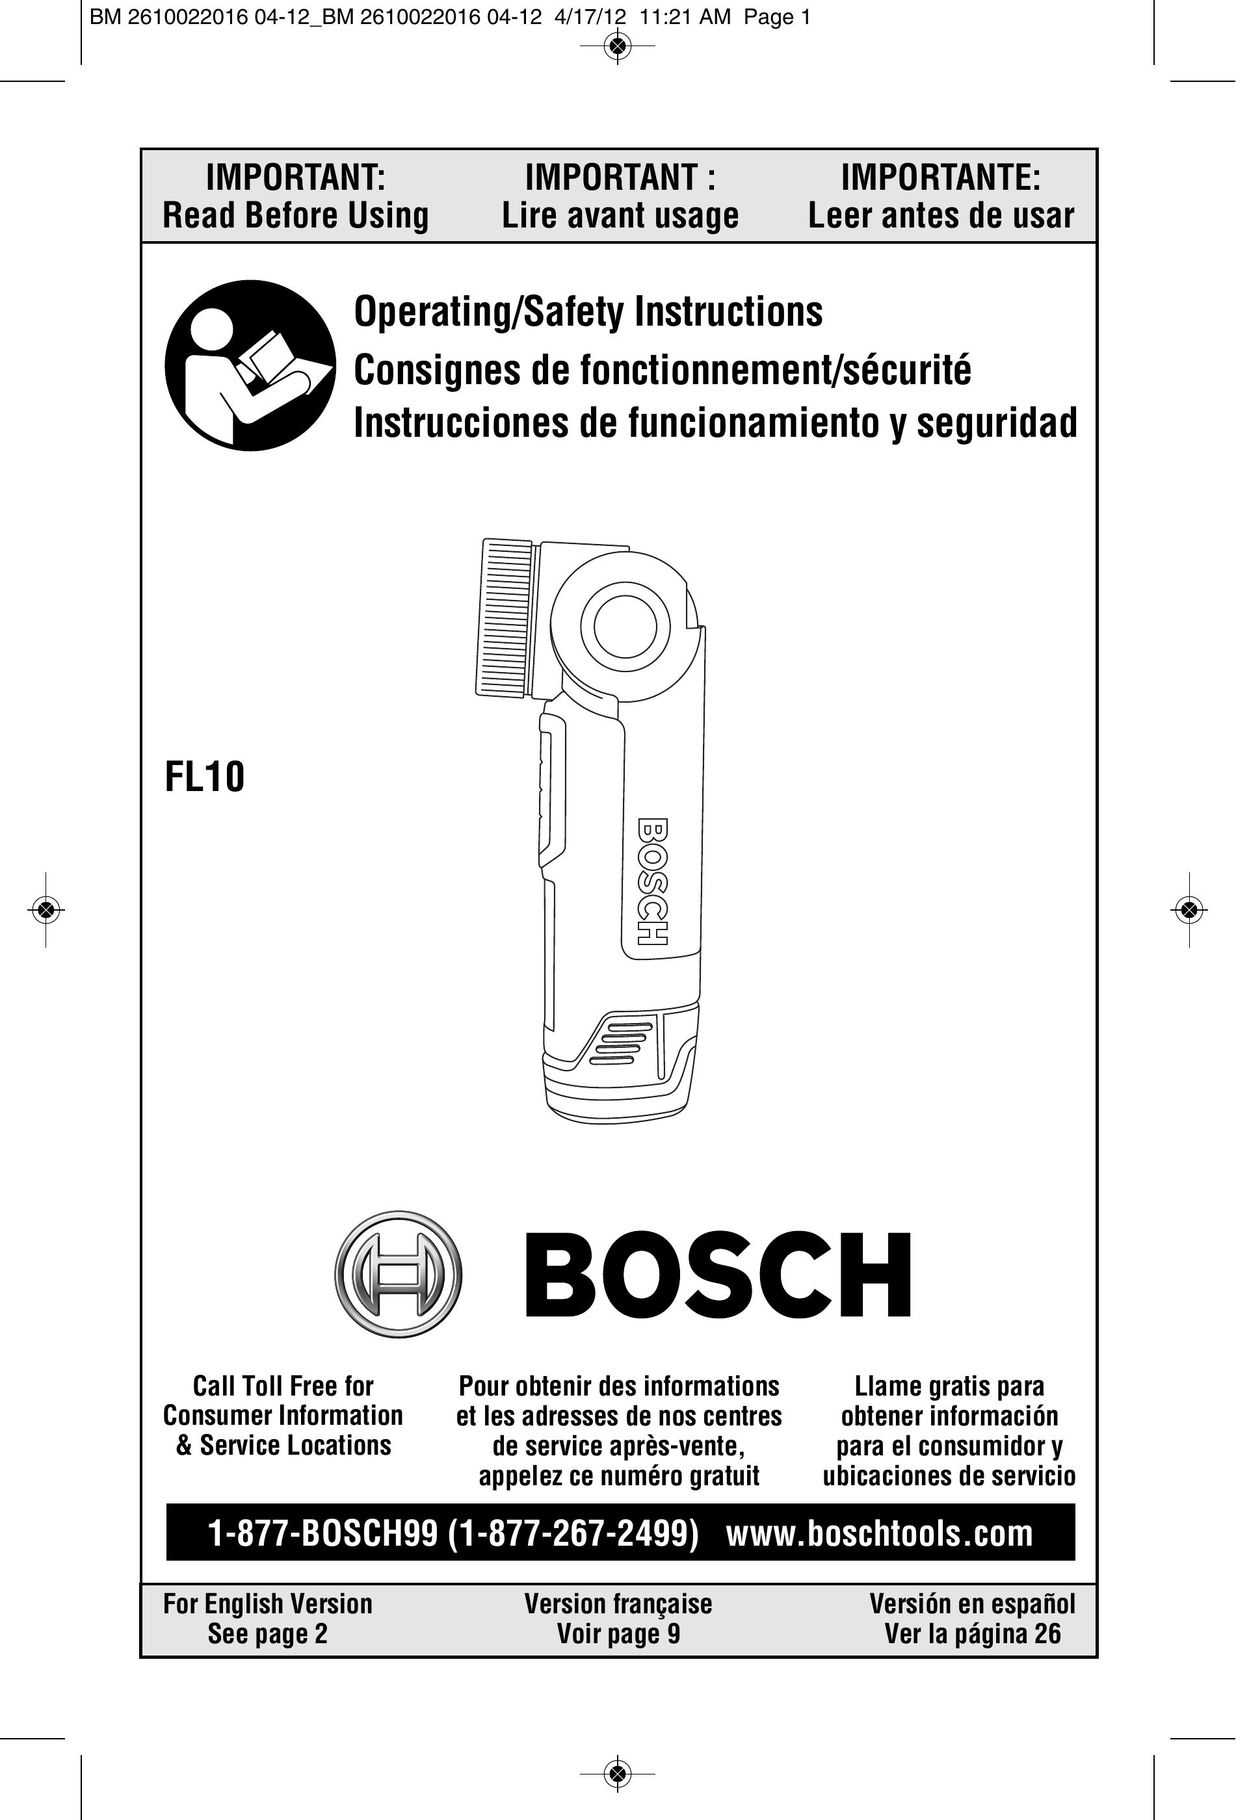 Bosch Power Tools CLPK31-120 Home Safety Product User Manual